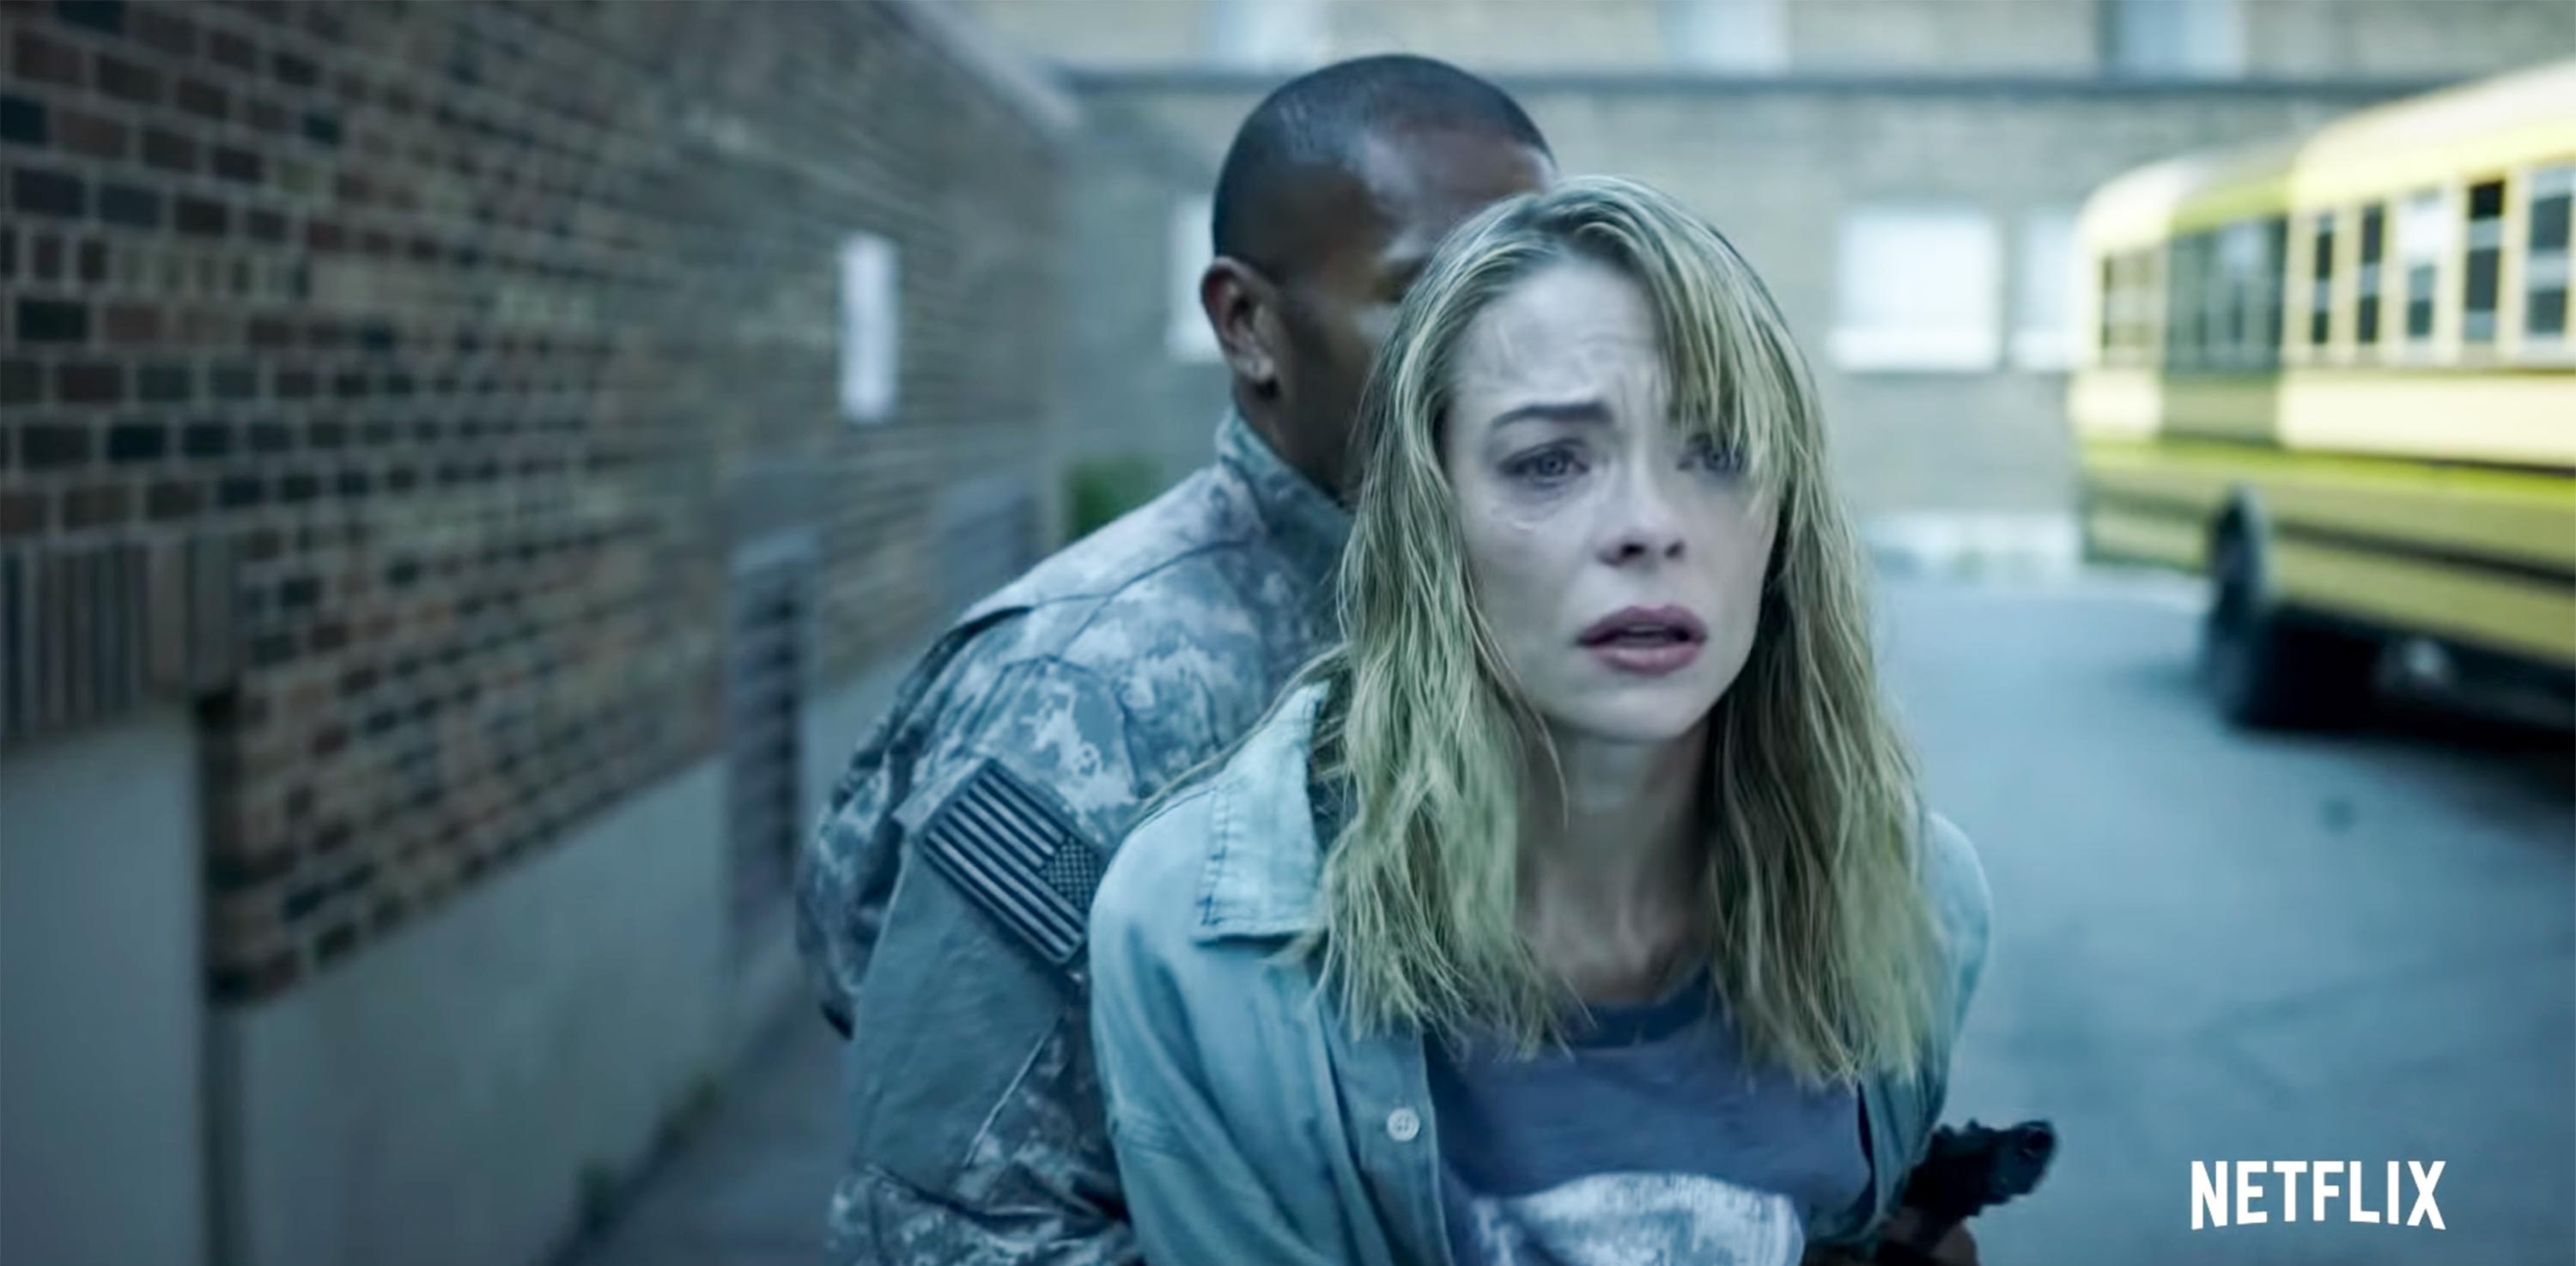 Major update on The OA season 3: when is it coming on Netflix? What is the plot of season 3? Jason Isaac claims it is amazing! Read to know more. 9